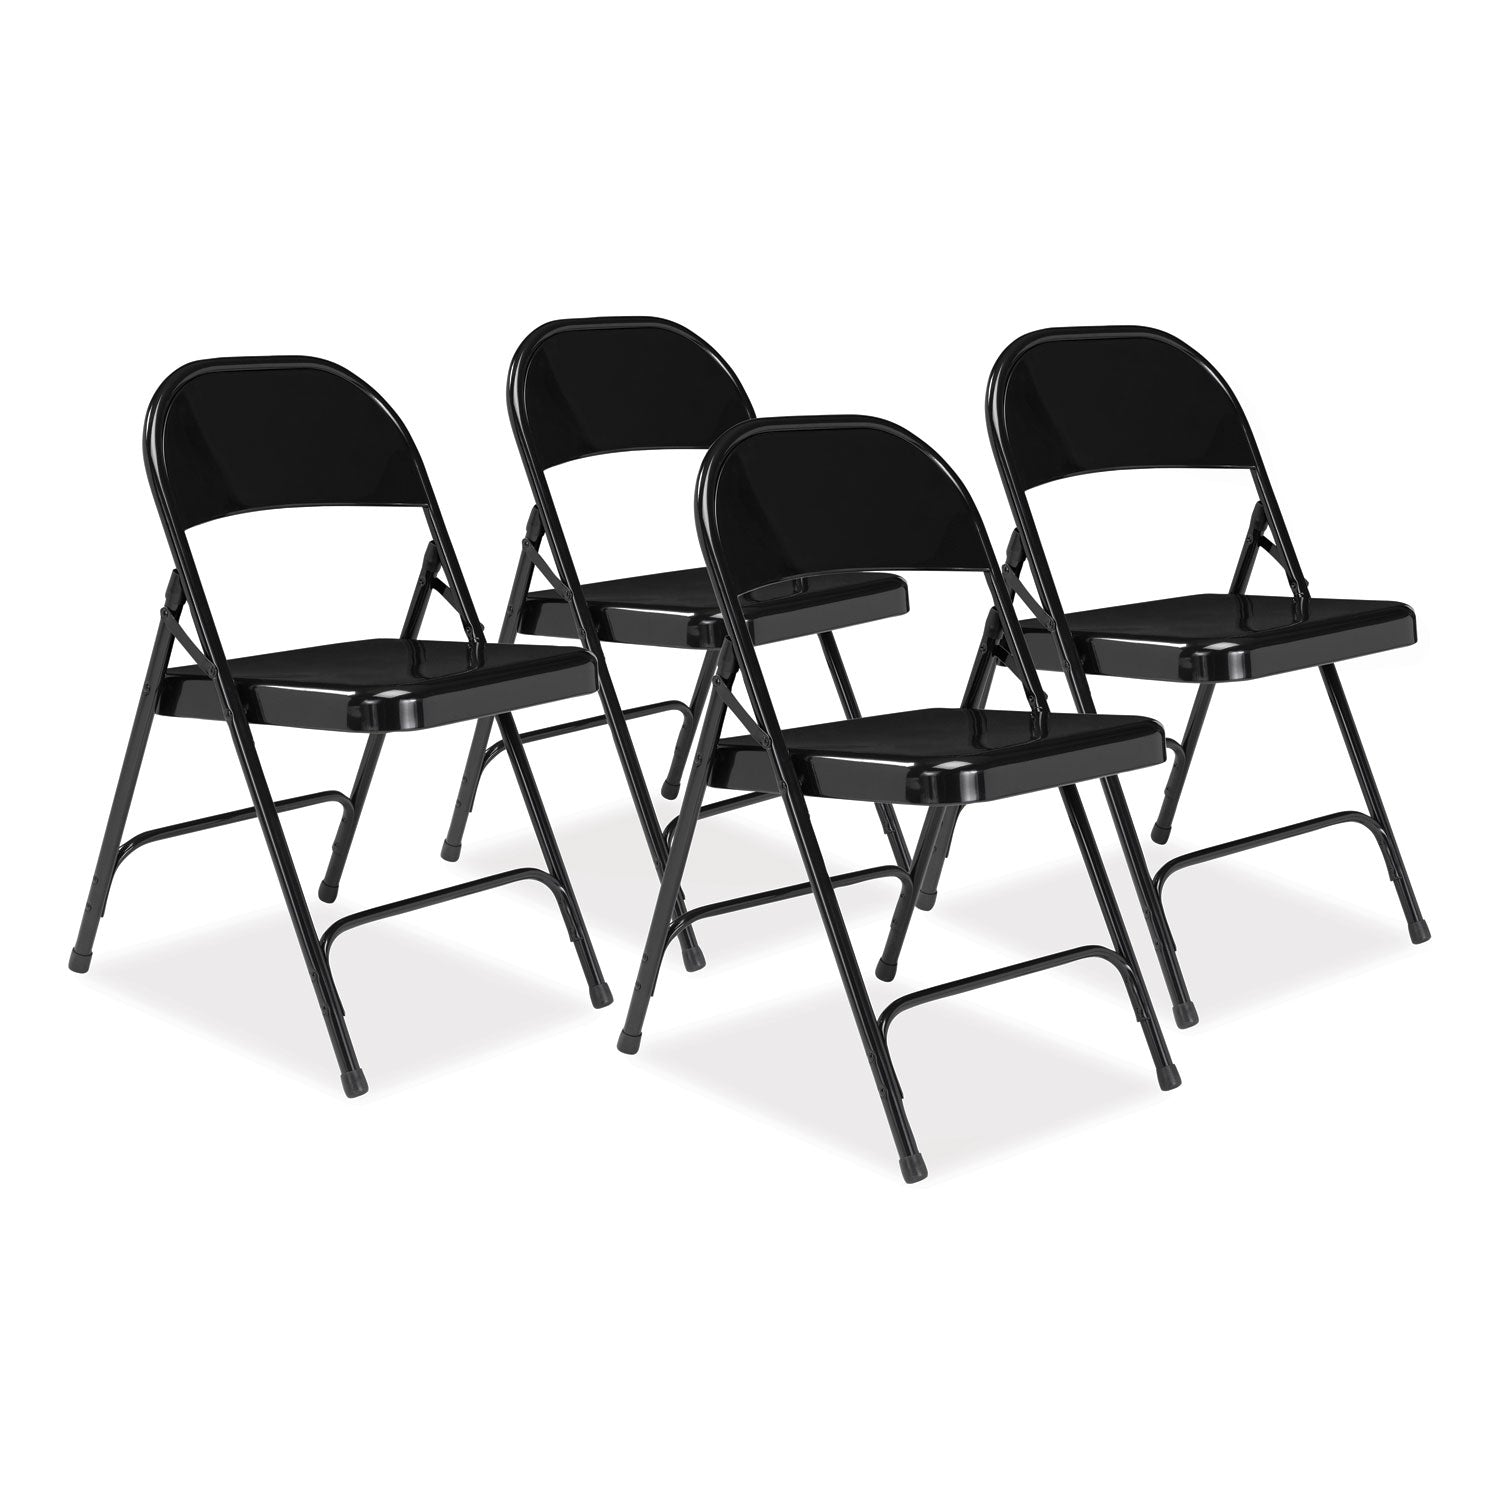 50-series-all-steel-folding-chair-supports-500-lb-1675-seat-height-black-seat-back-base-4-ctships-in-1-3-business-days_nps510 - 1